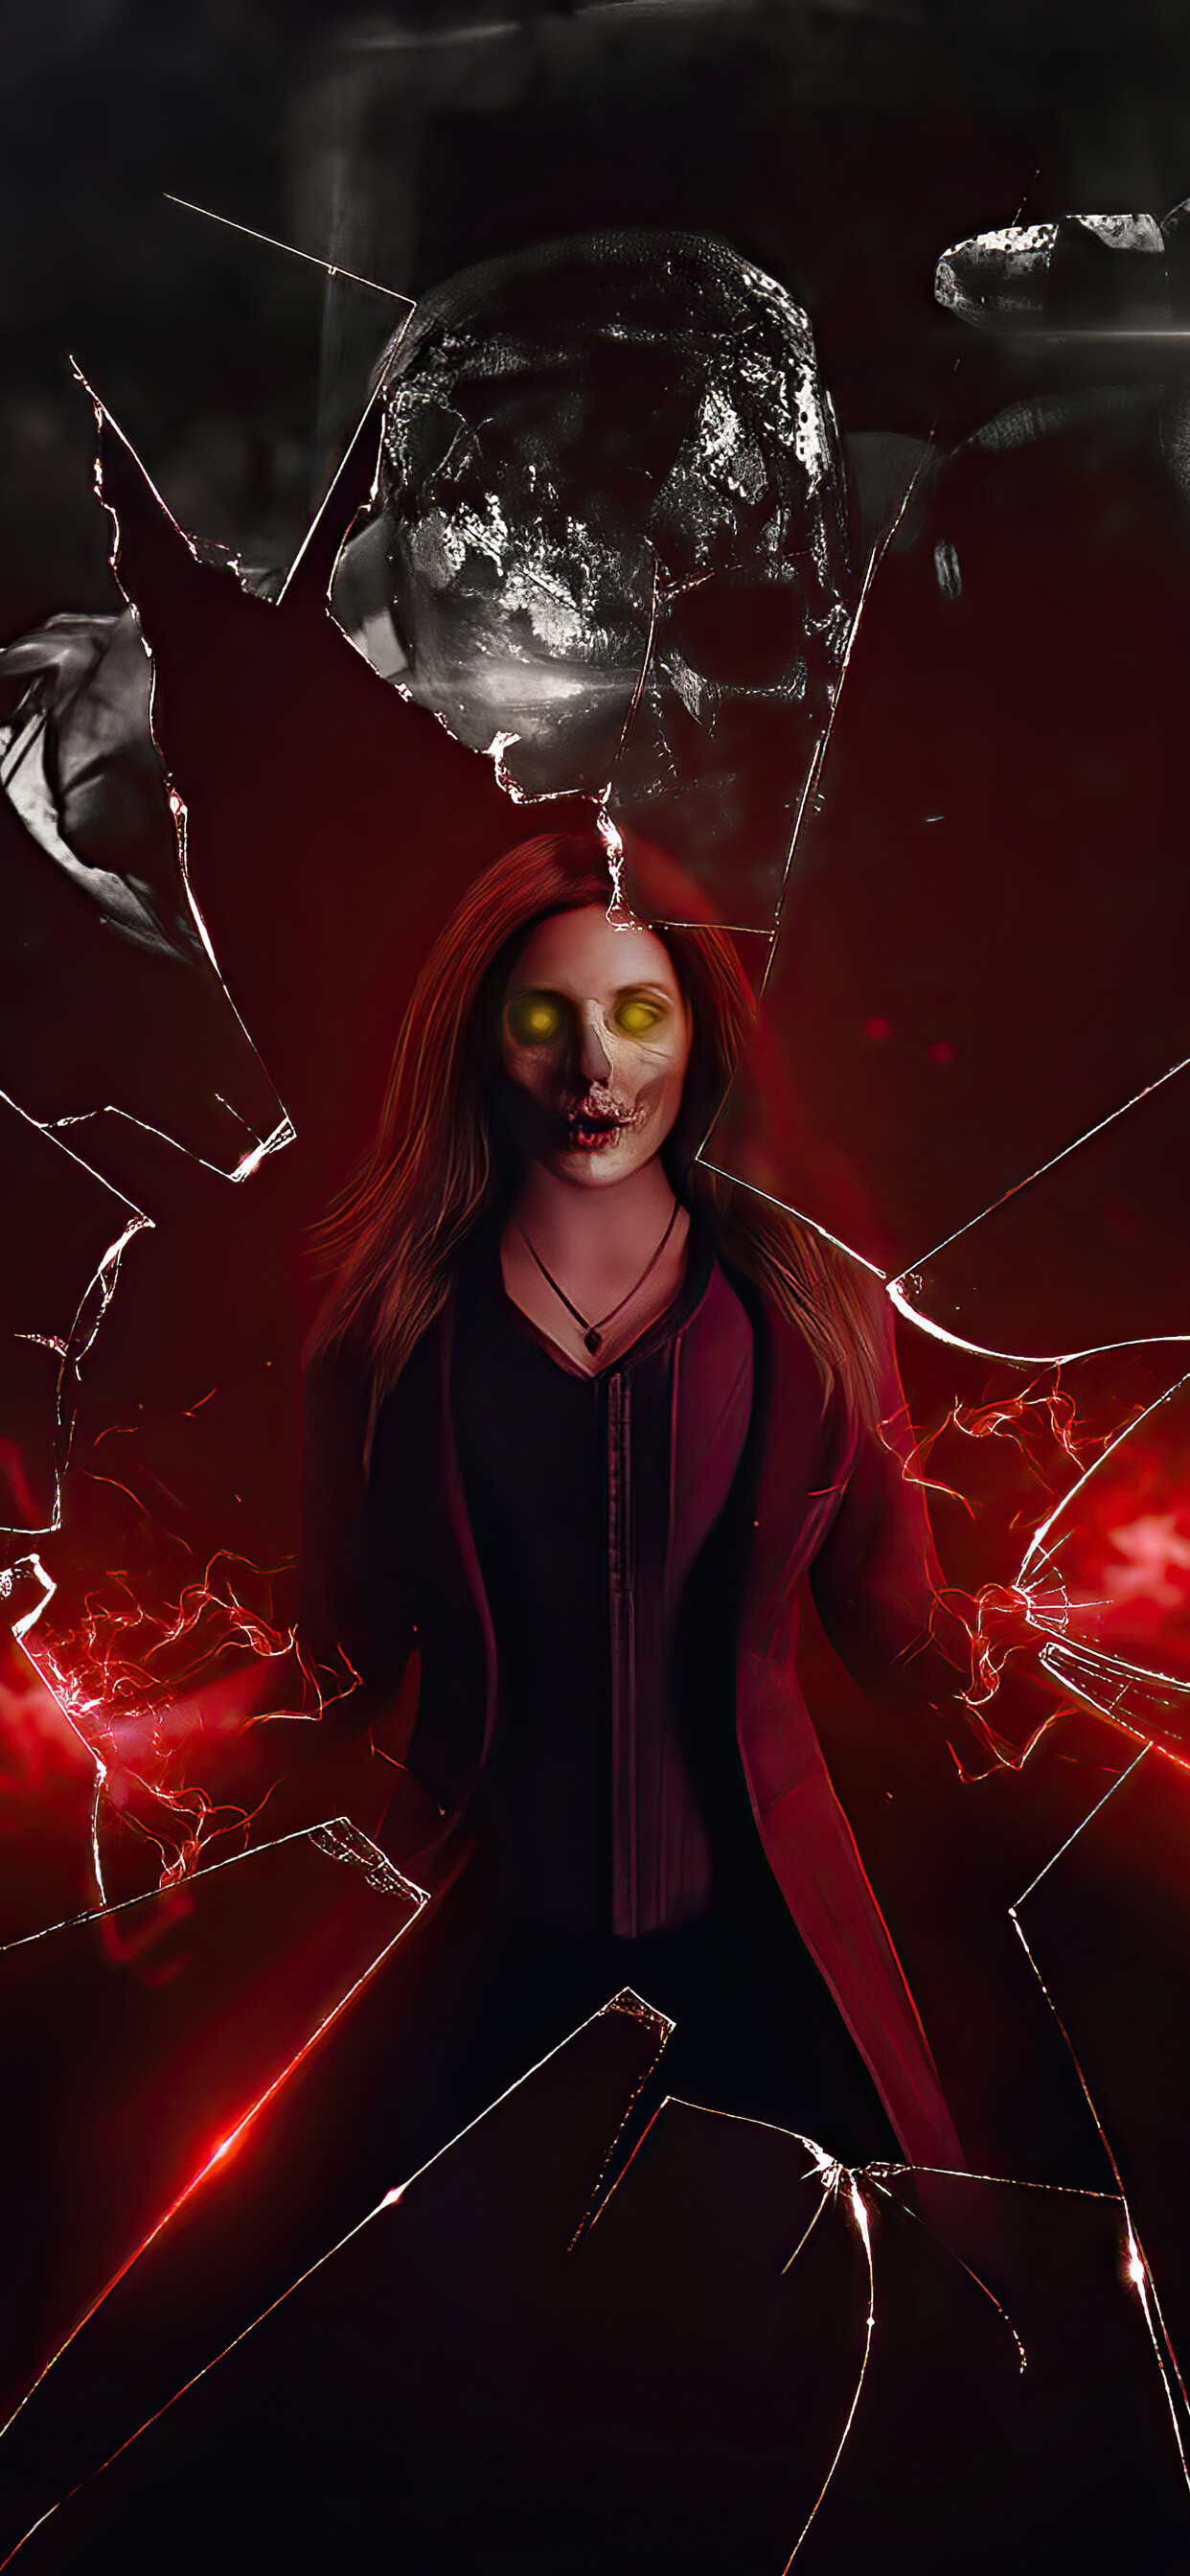 What If...?: Wanda Maximoff, Scarlet Witch, Was infected by the Quantum Virus. 1250x2690 HD Background.